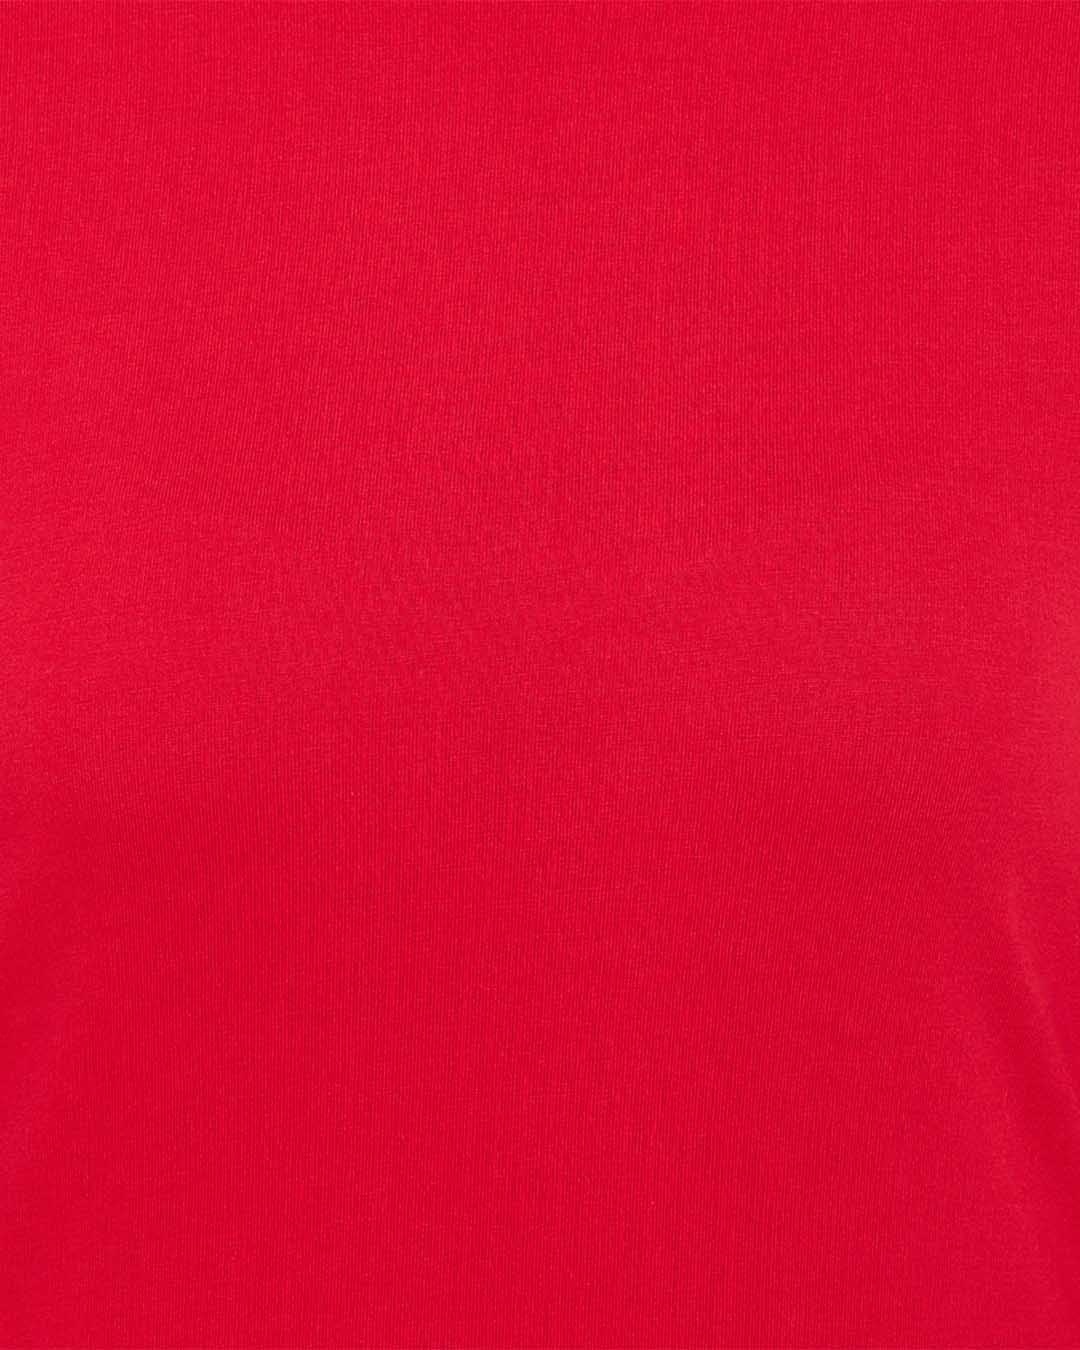 Shop Chic Basic Sleep Top In Red   Cotton